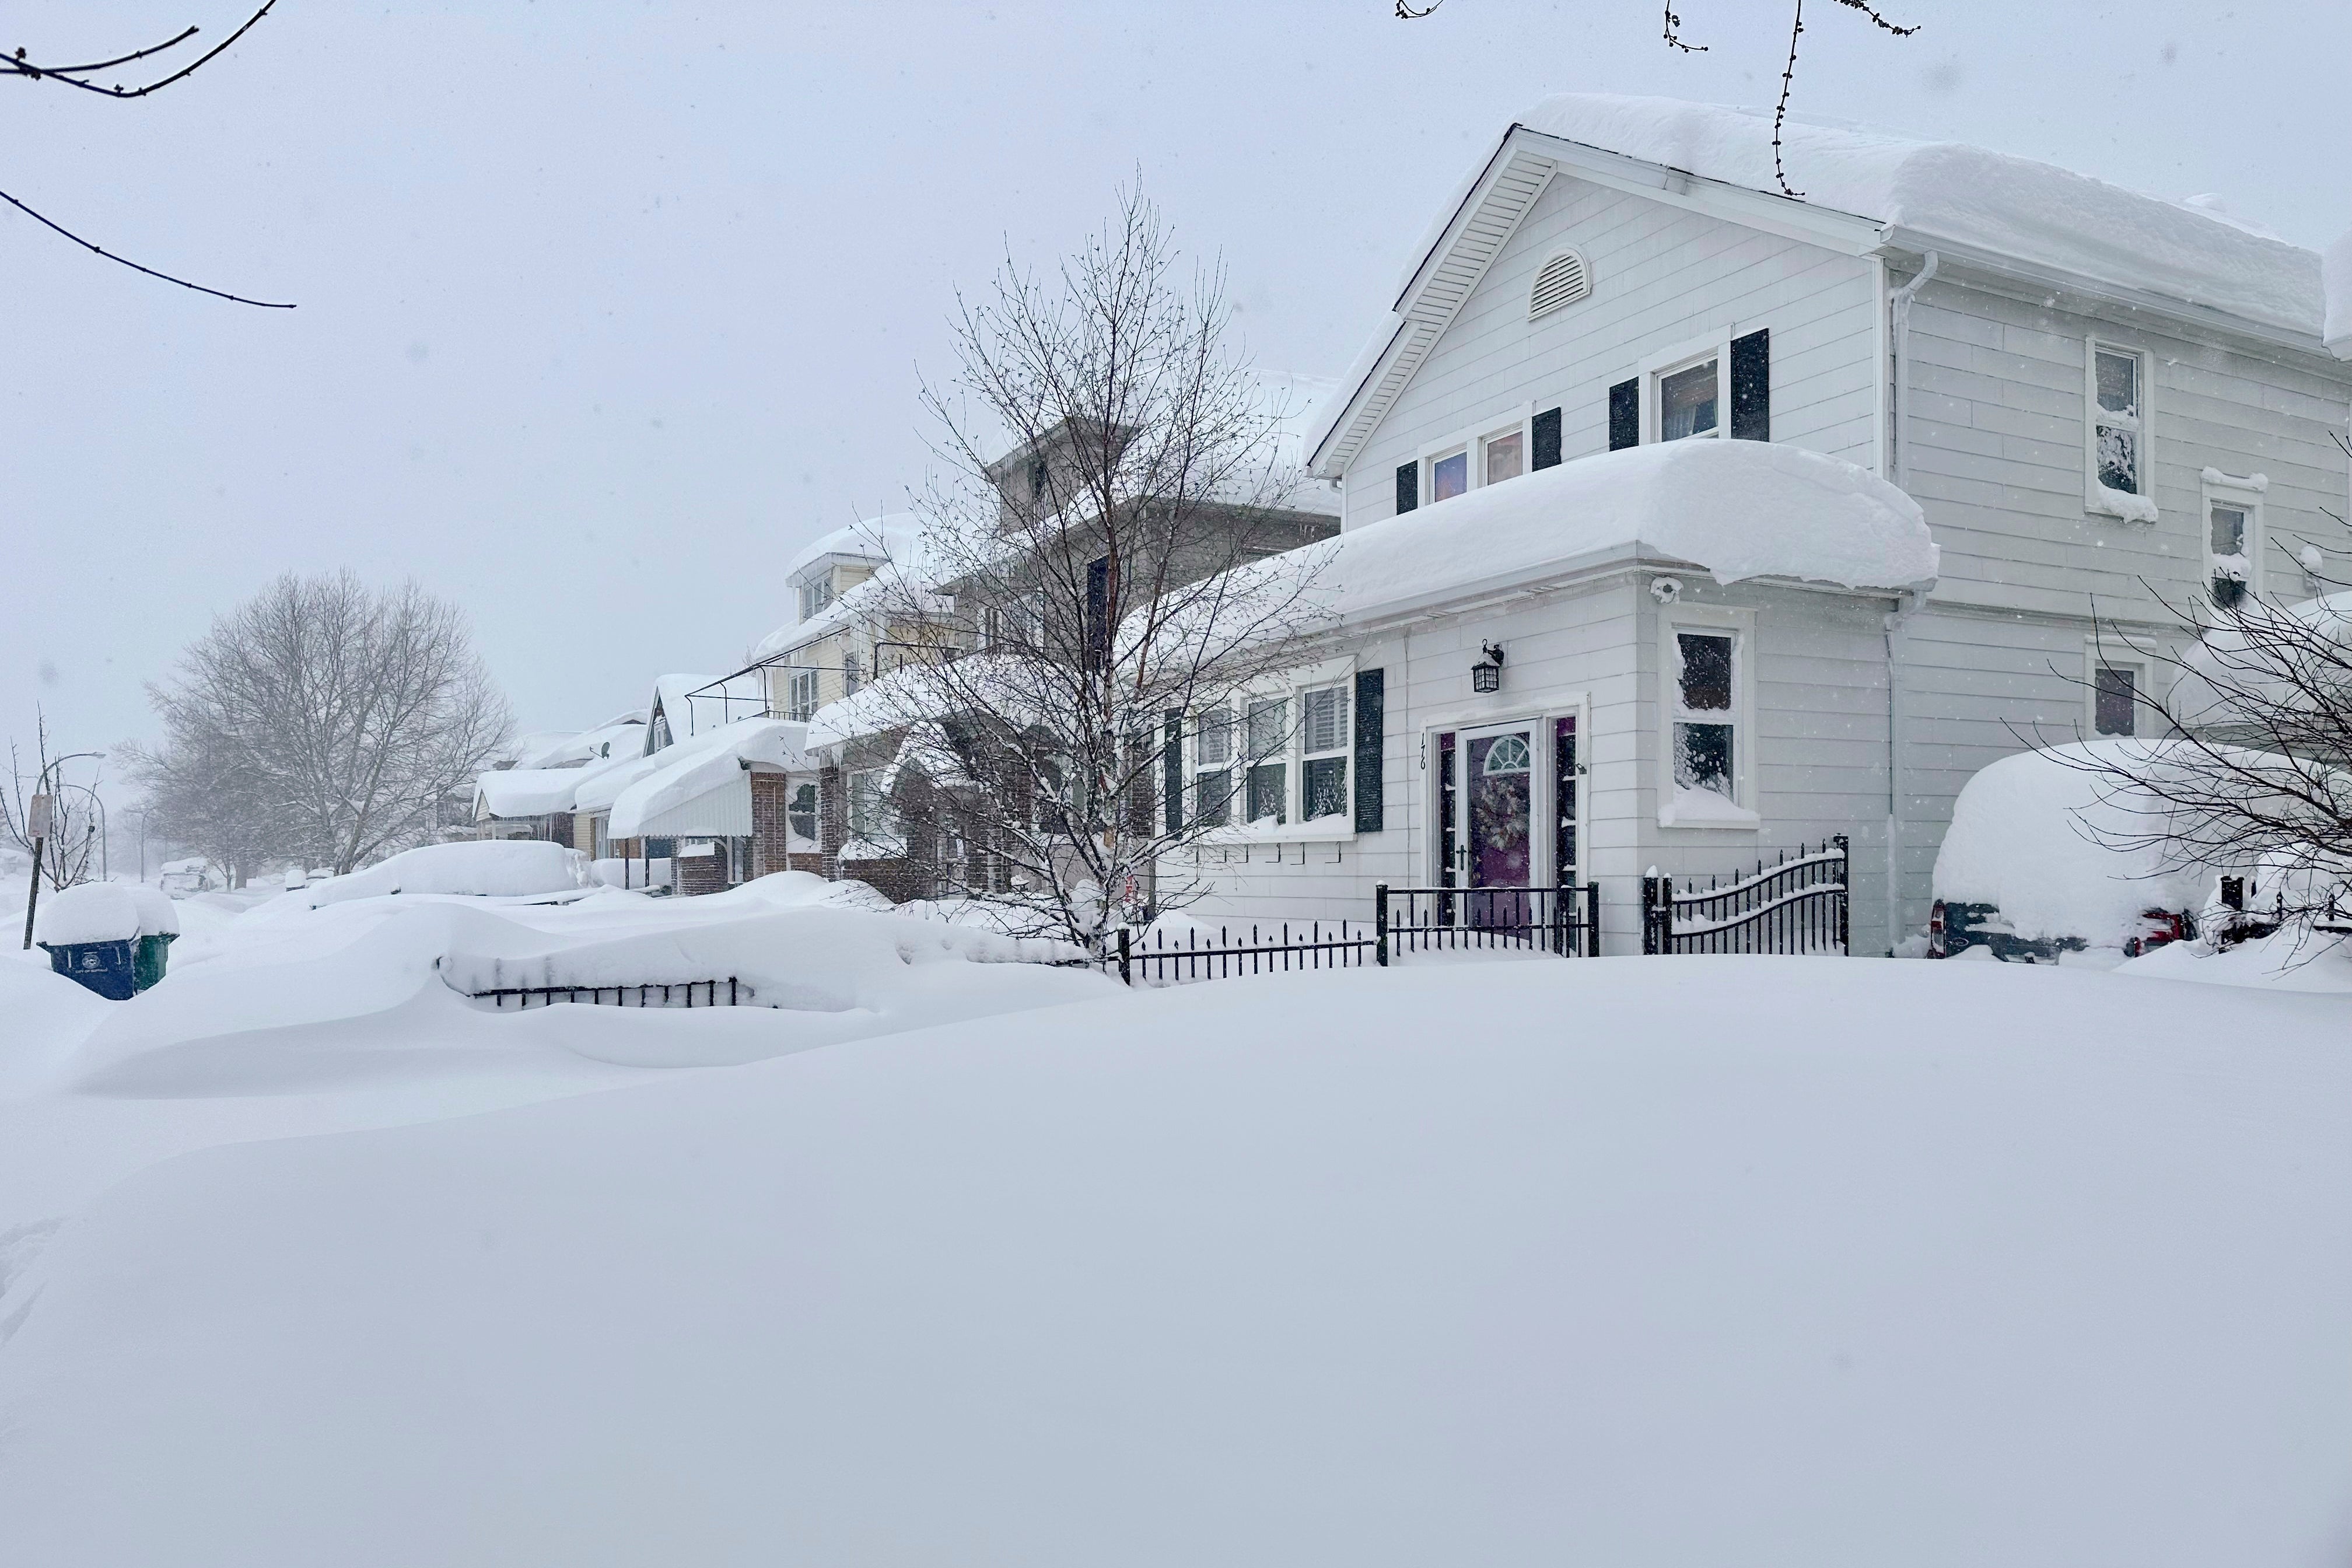 

<p>Snow falls in Buffalo, N.Y.</p>
<p>” height=”2688″ width=”4032″ layout=”responsive” i-amphtml-layout=”responsive”><i-amphtml-sizer slot=